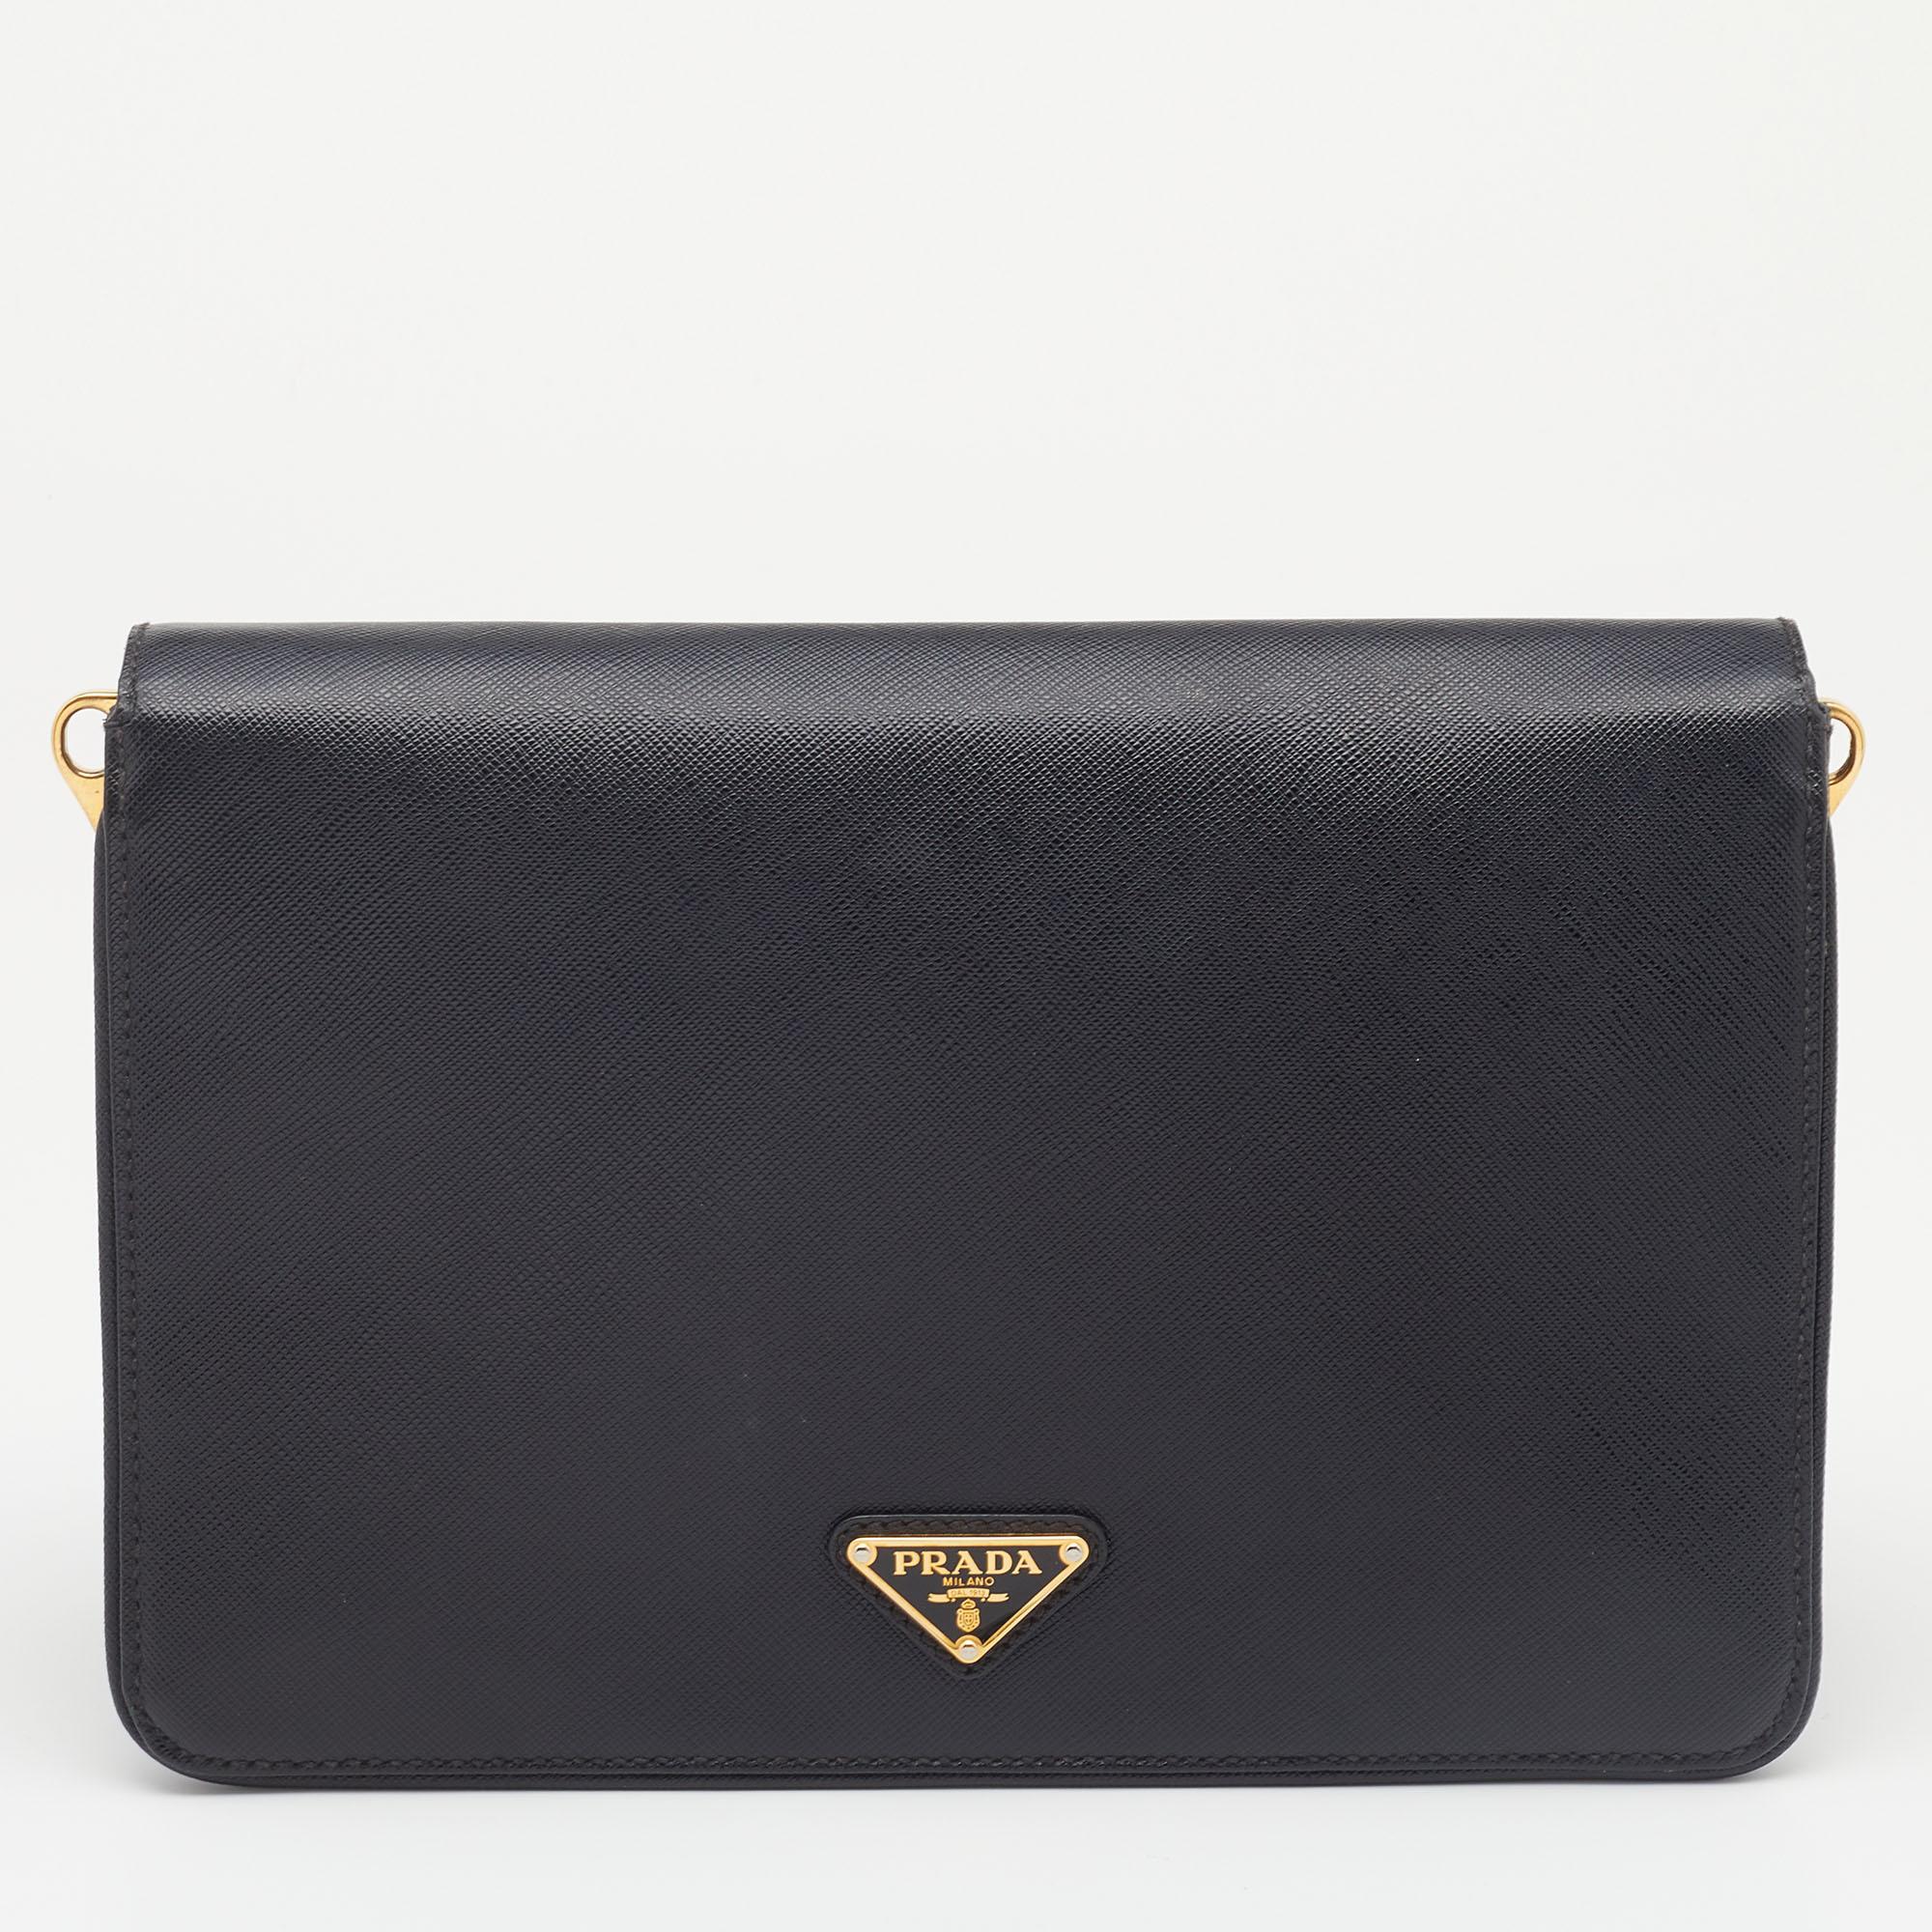 Now here's a bag that is both stylish and functional! Prada brings us this Cinghiale crossbody bag that will make you look glamorous! It is made from black Saffiano leather and is highlighted with gold-tone hardware. It is completed with an